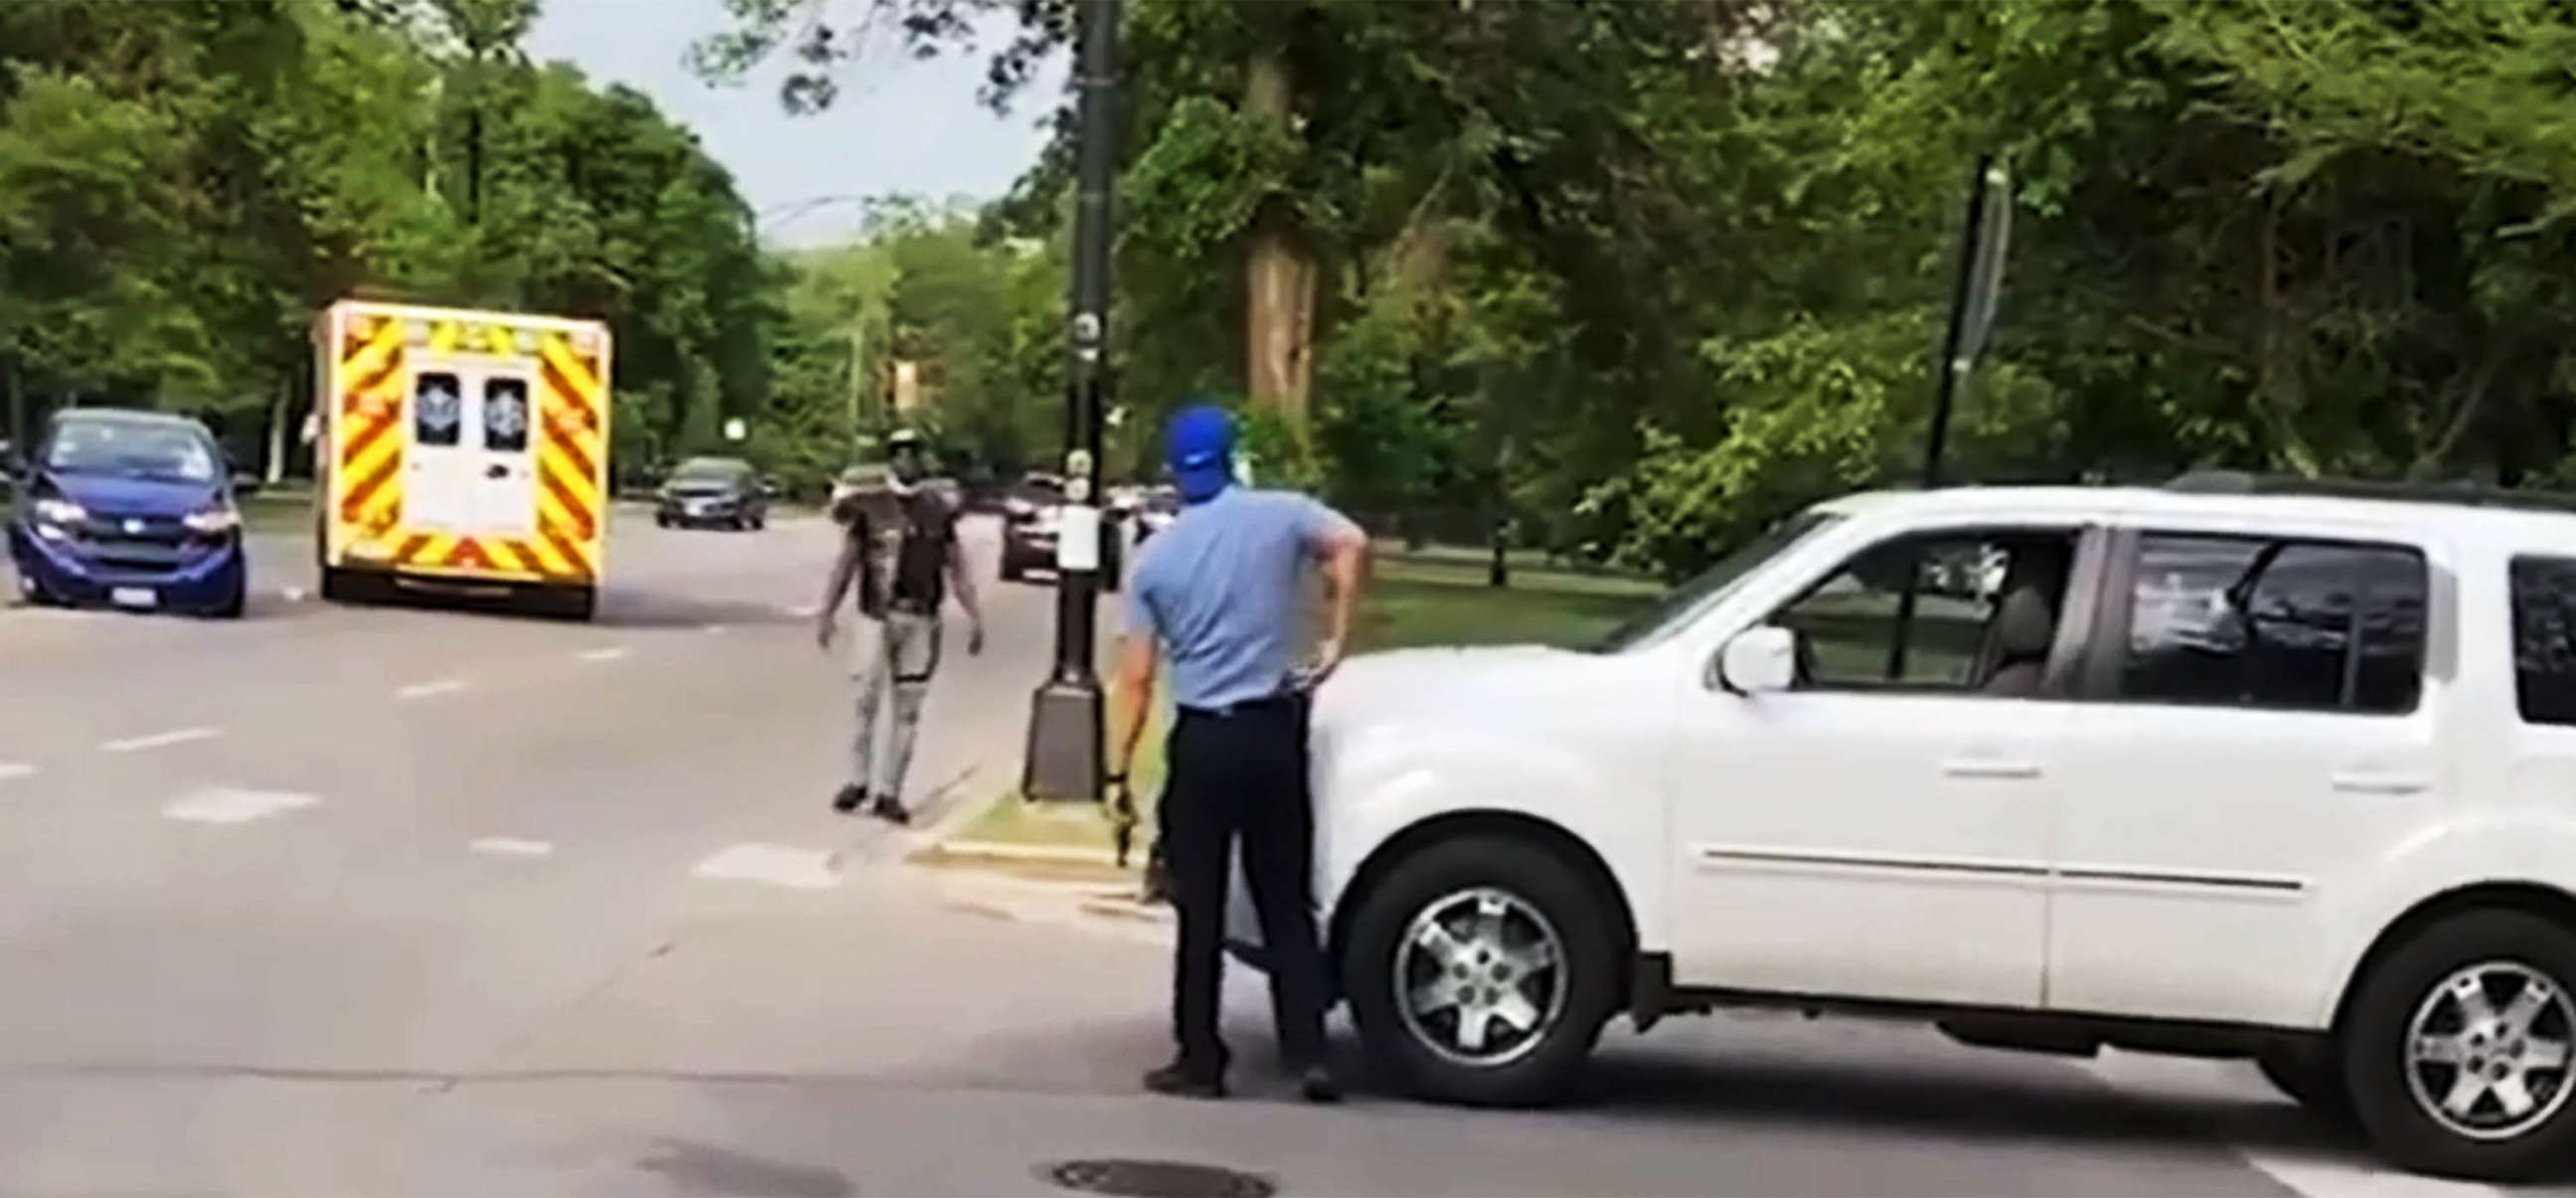 PHOTO: Video obtained by the ABC7/WLS-TV I team shows a man with a weapon in his hand, allegedly Chicago Police office Evan Solano, arguing with another driver.